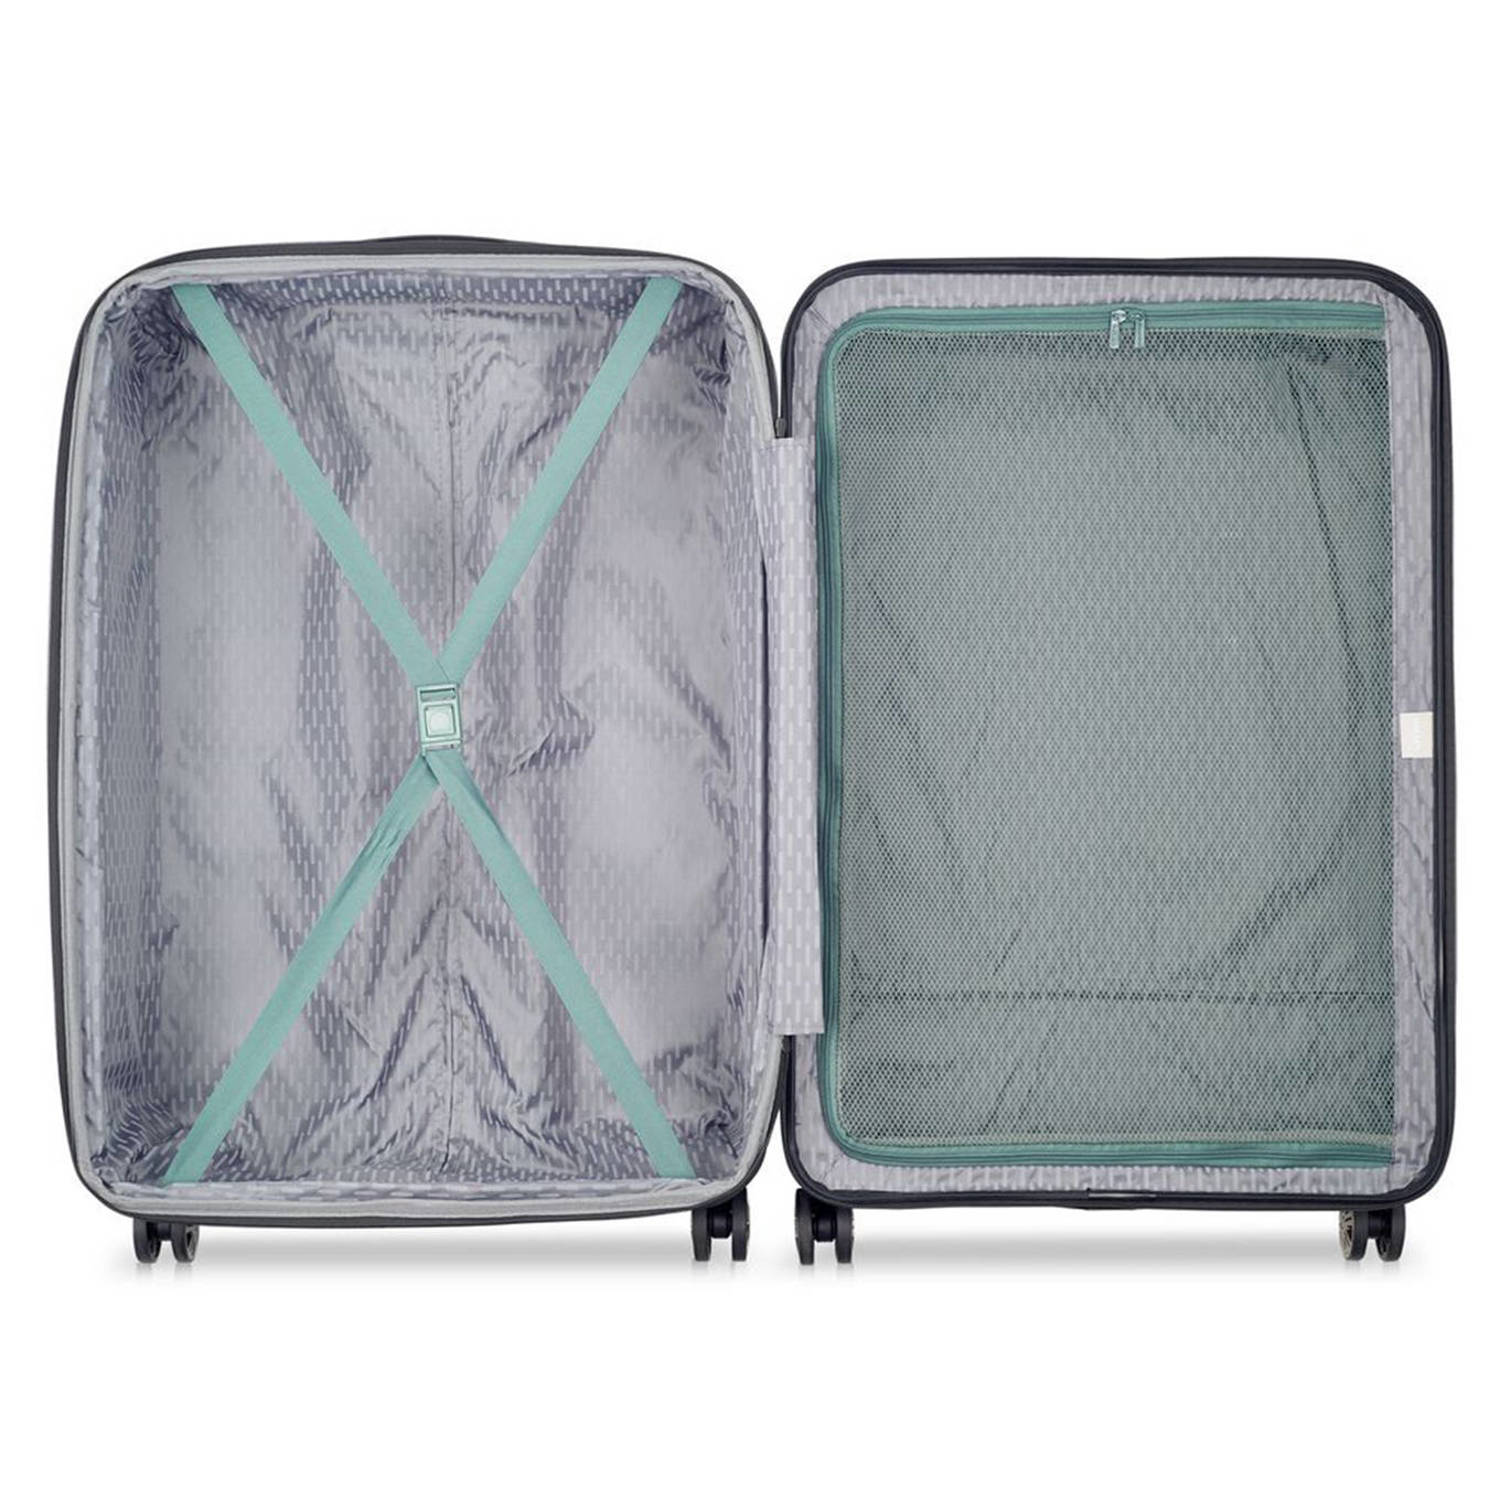 Delsey trolley Air Armour 77 cm. Expandable turquoise